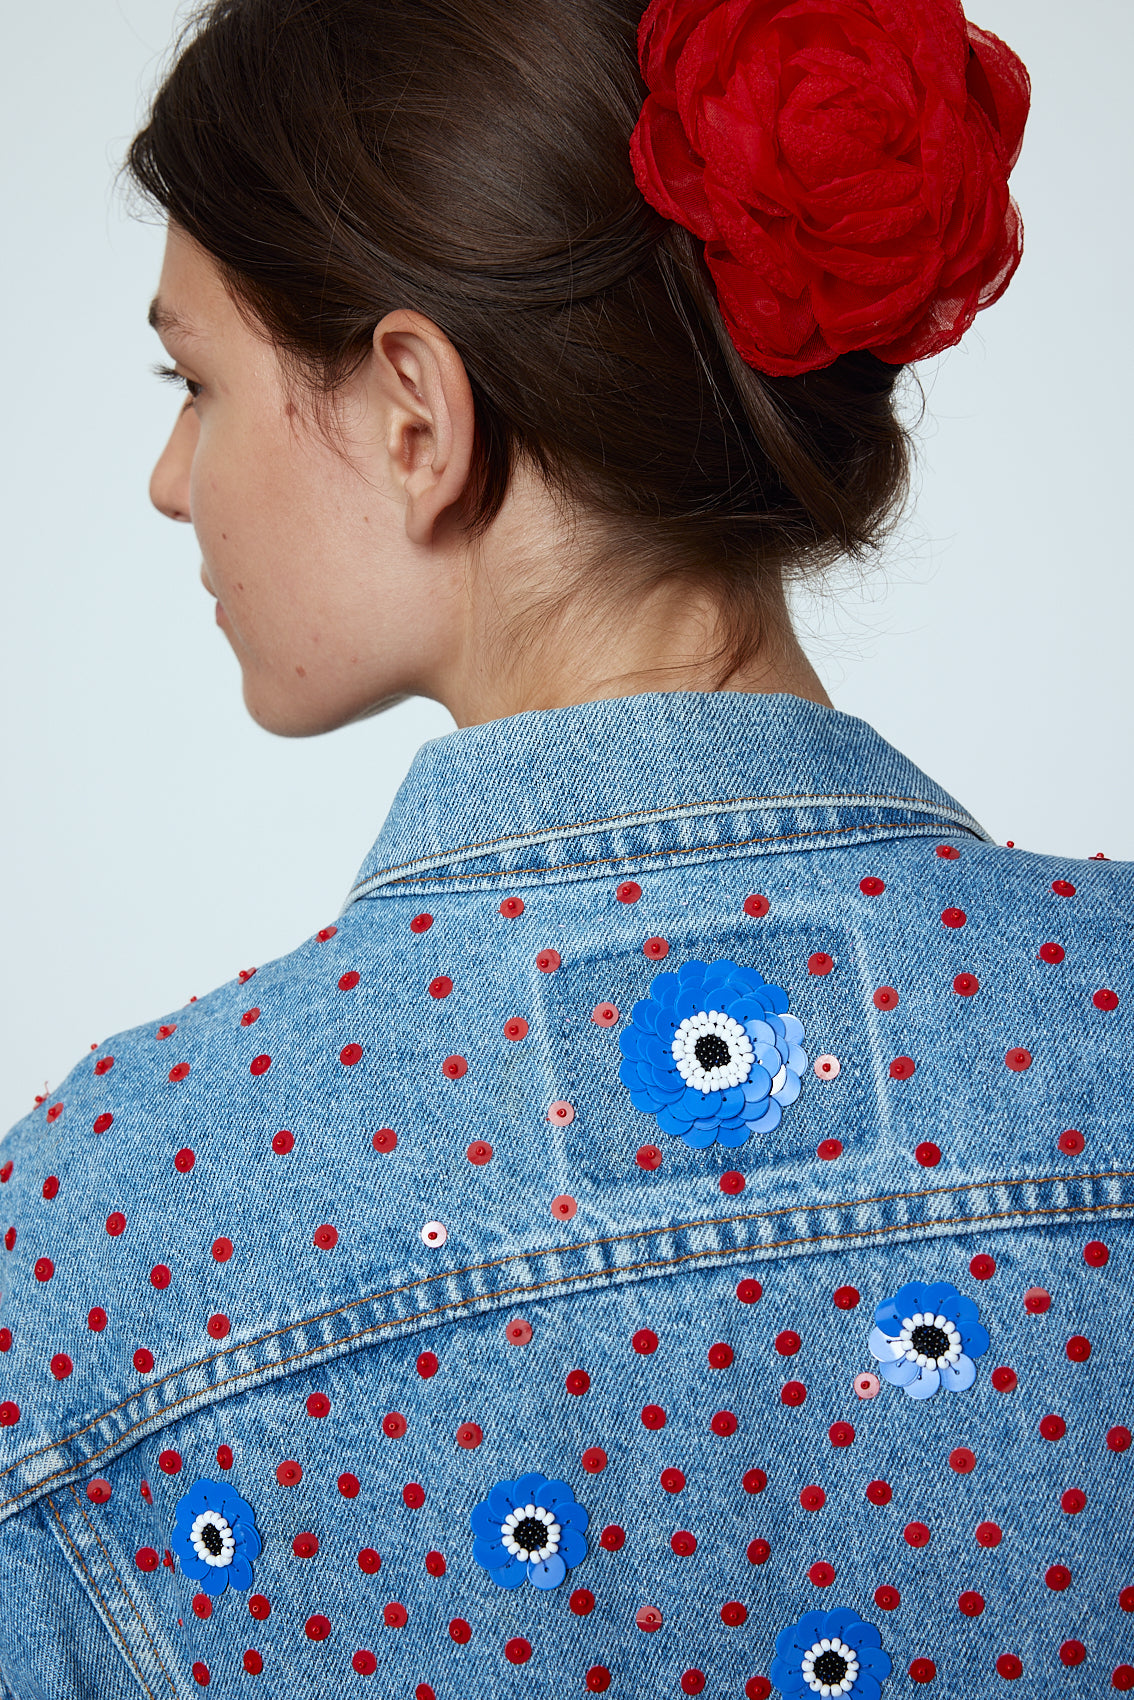 Upcycled Denim Jacket exquisitely hand-embroidered by skilled artisans in our flower daisy pattern using beadings and sequins.